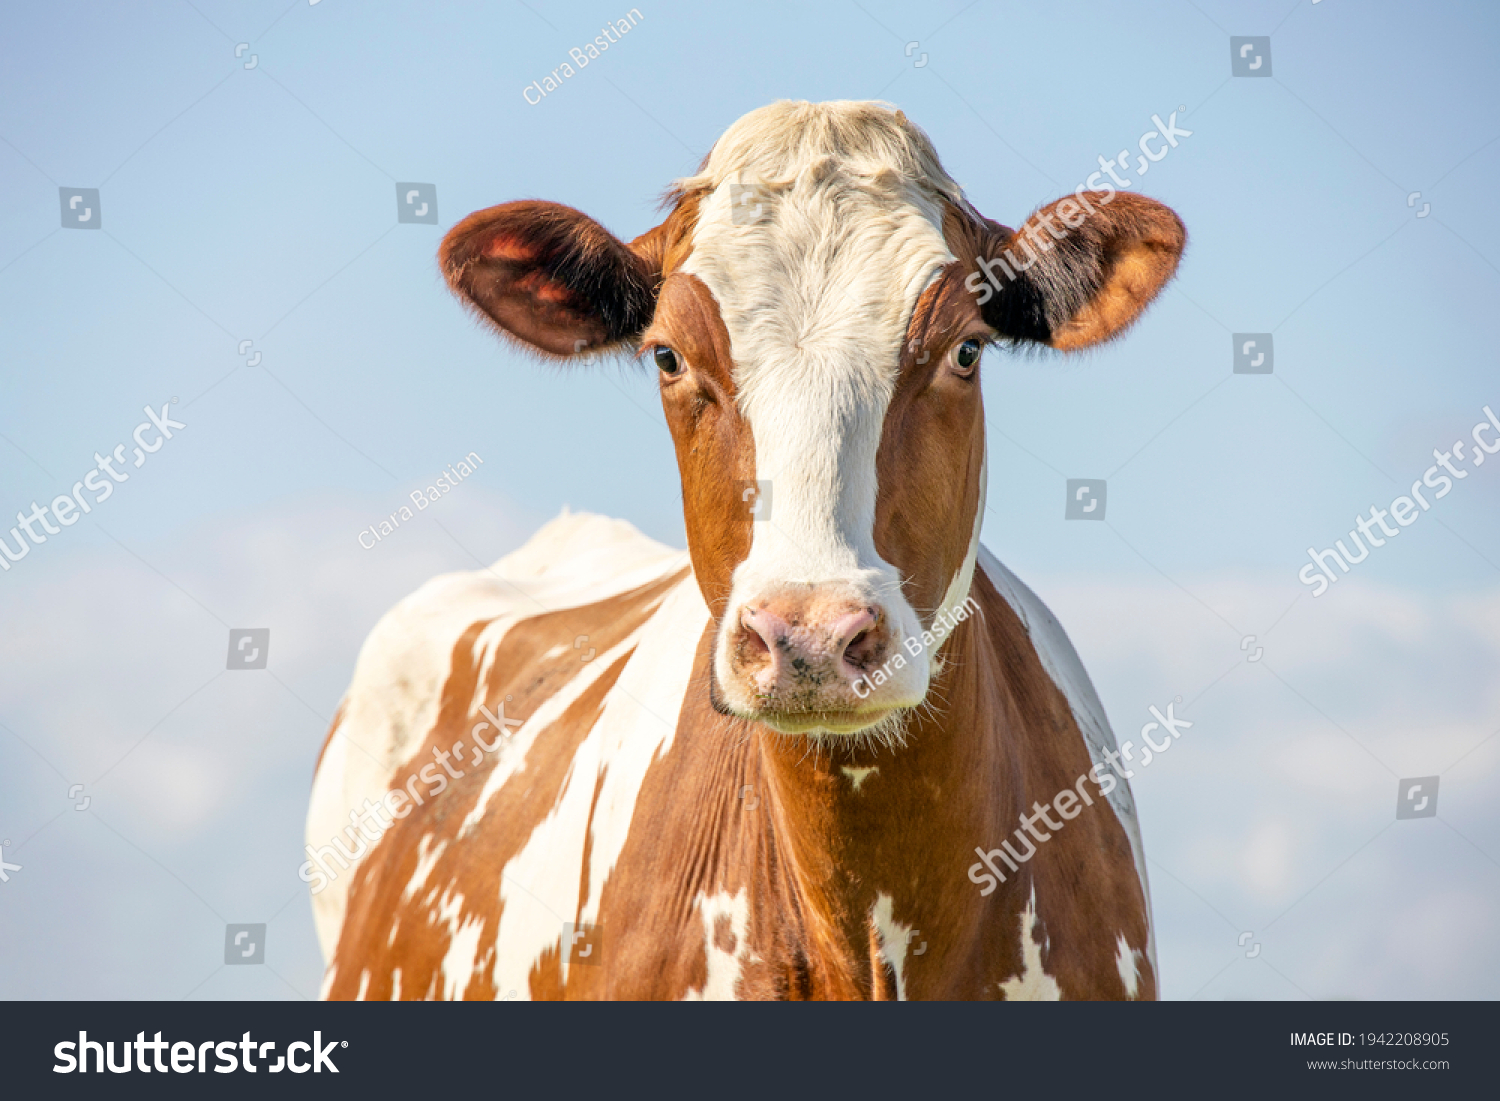 Cow portrait, a cute and calm red bovine, with white blaze, pink nose and friendly expression, adorable #1942208905